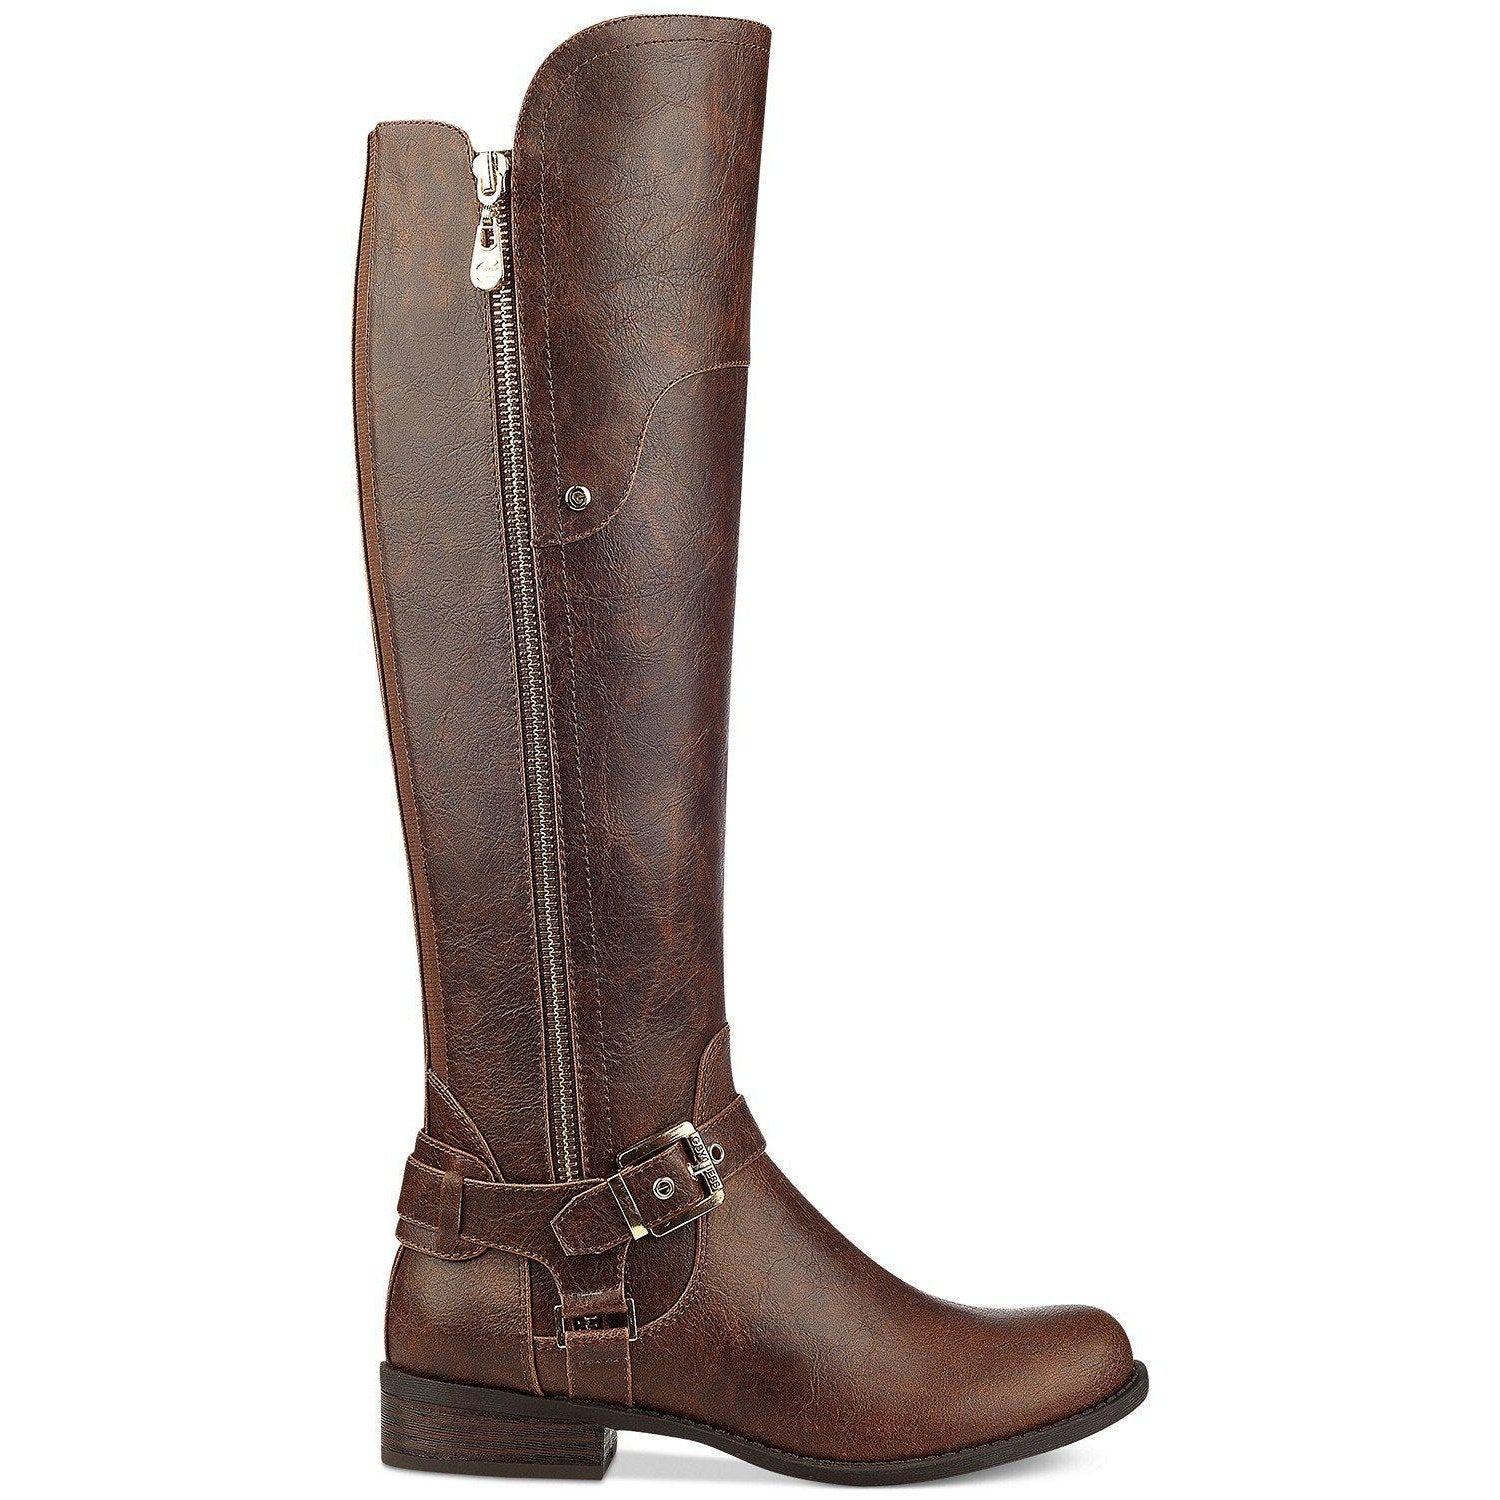 G by Guess Harson Wide-Calf Tall Boots Women's Shoes Brown-Shoes-G By Guess-6-ShoeShock